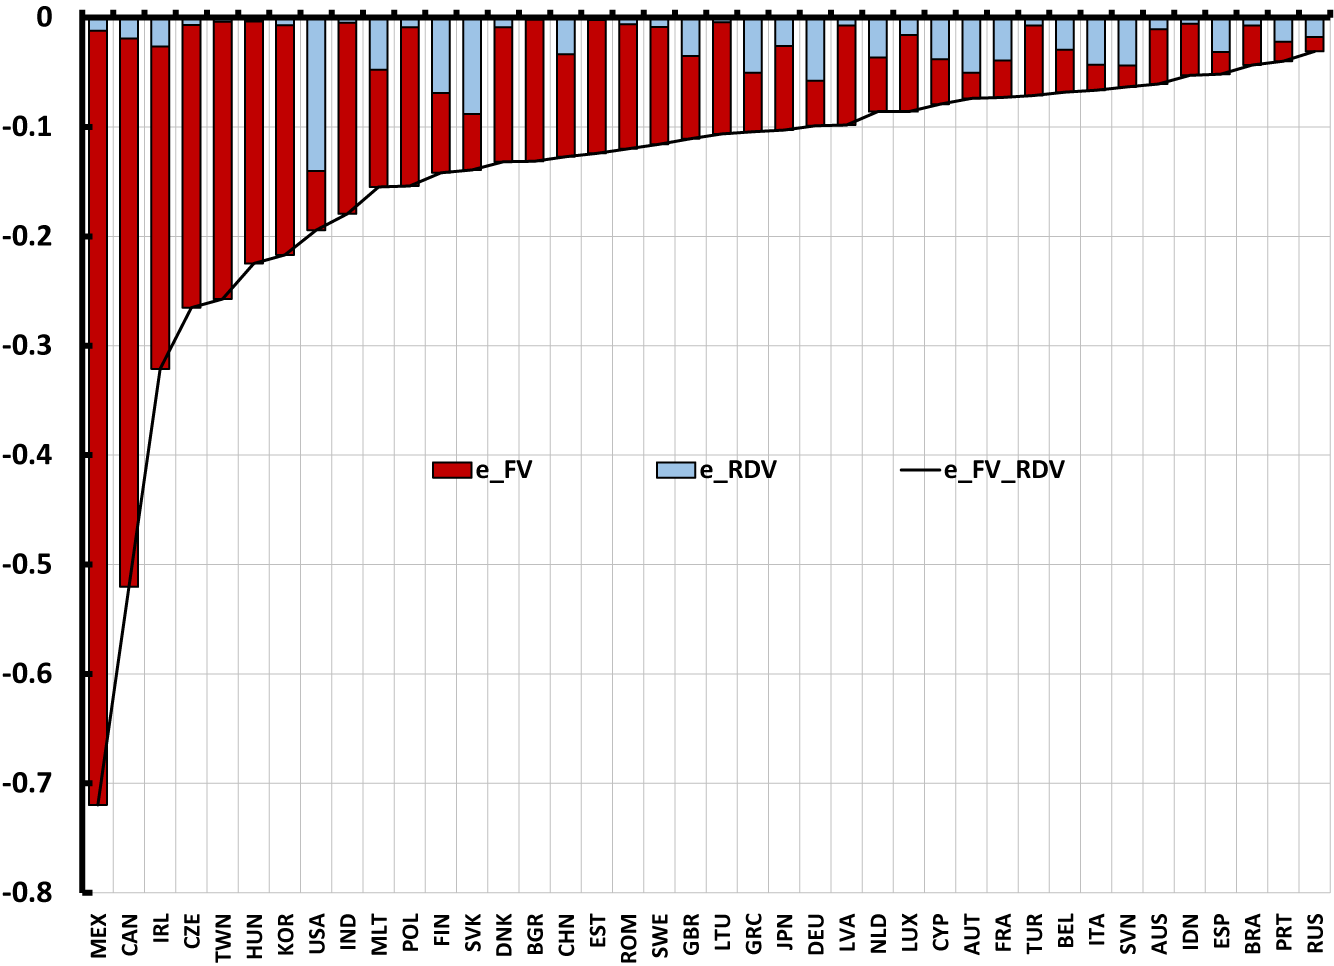 Figure 2. Average effect of FV and RDV on exchange rate elasticity across countries. See accessible link for data description.